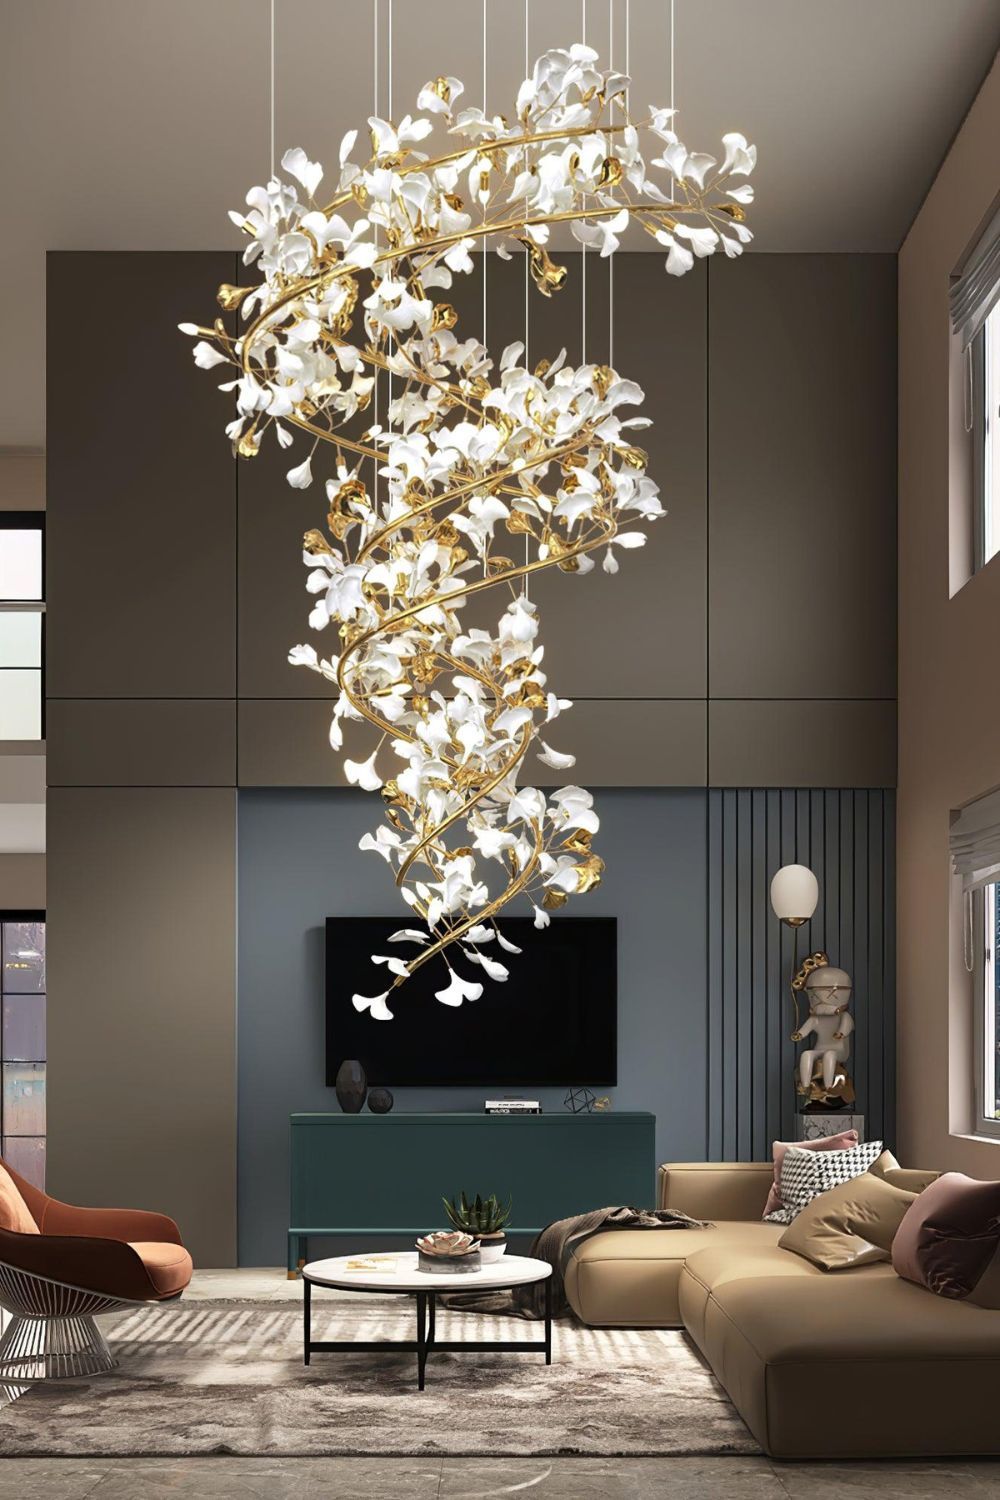 Chandeliers Designs : Stunning Chandeliers Designs that Will Transform Your Space